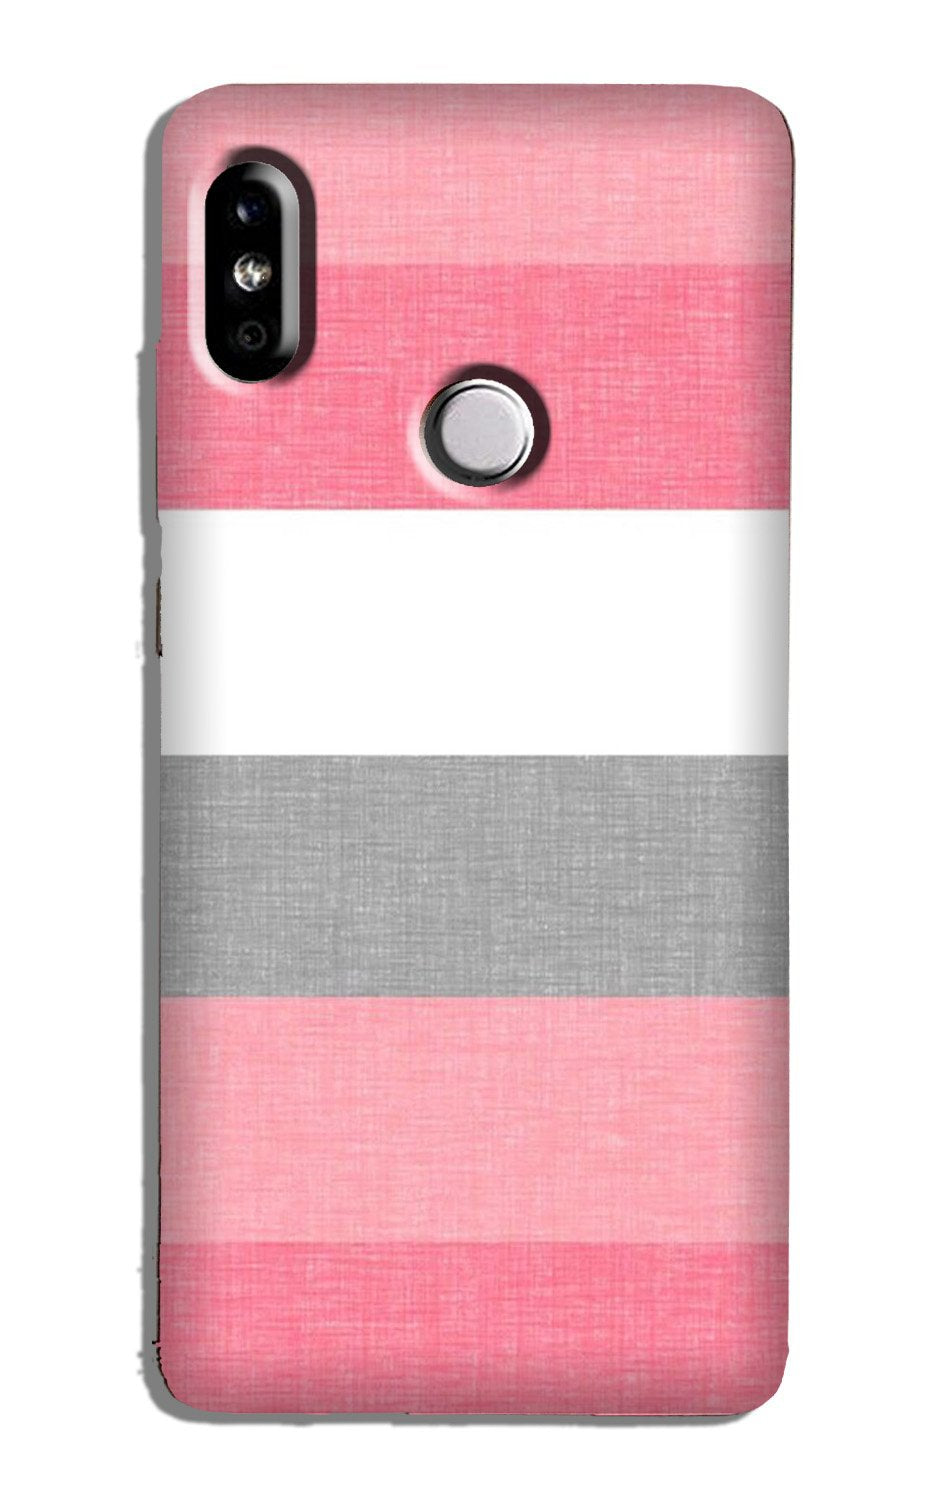 Pink white pattern Case for Redmi Note 5 Pro